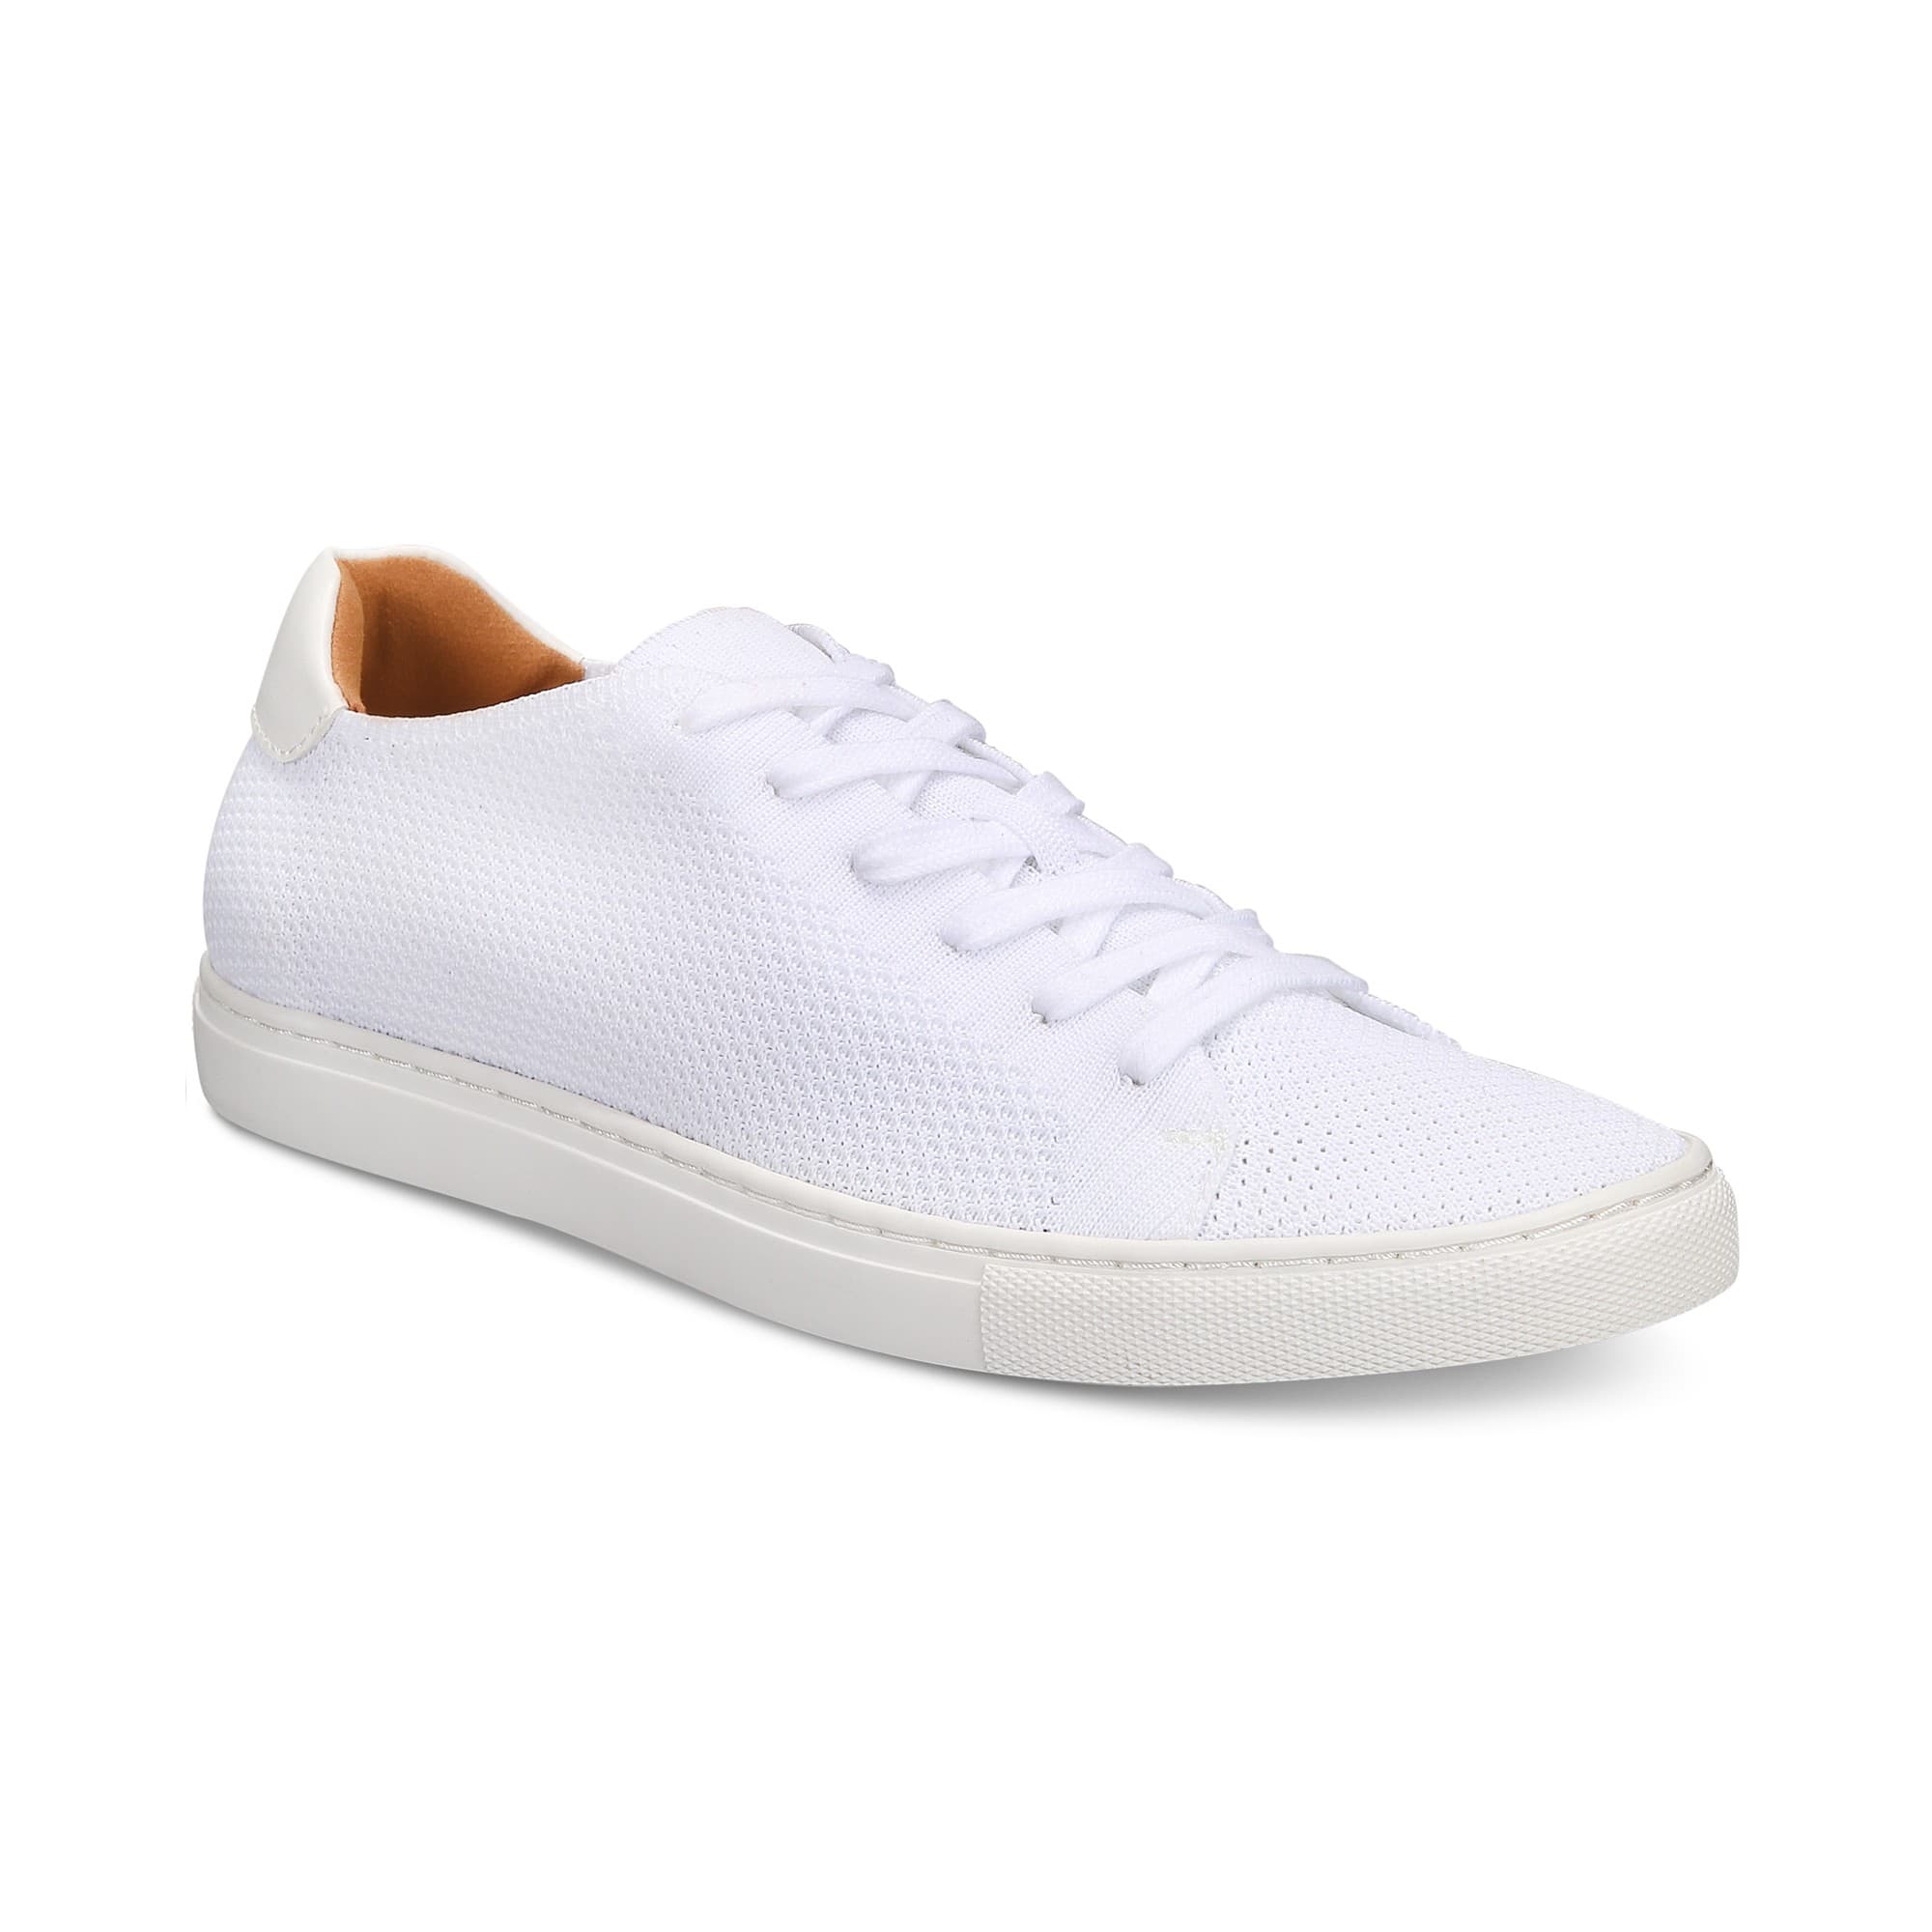 woocommerce-673321-2209615.cloudwaysapps.com-bar-iii-mens-white-donnie-knit-lace-up-sneakers